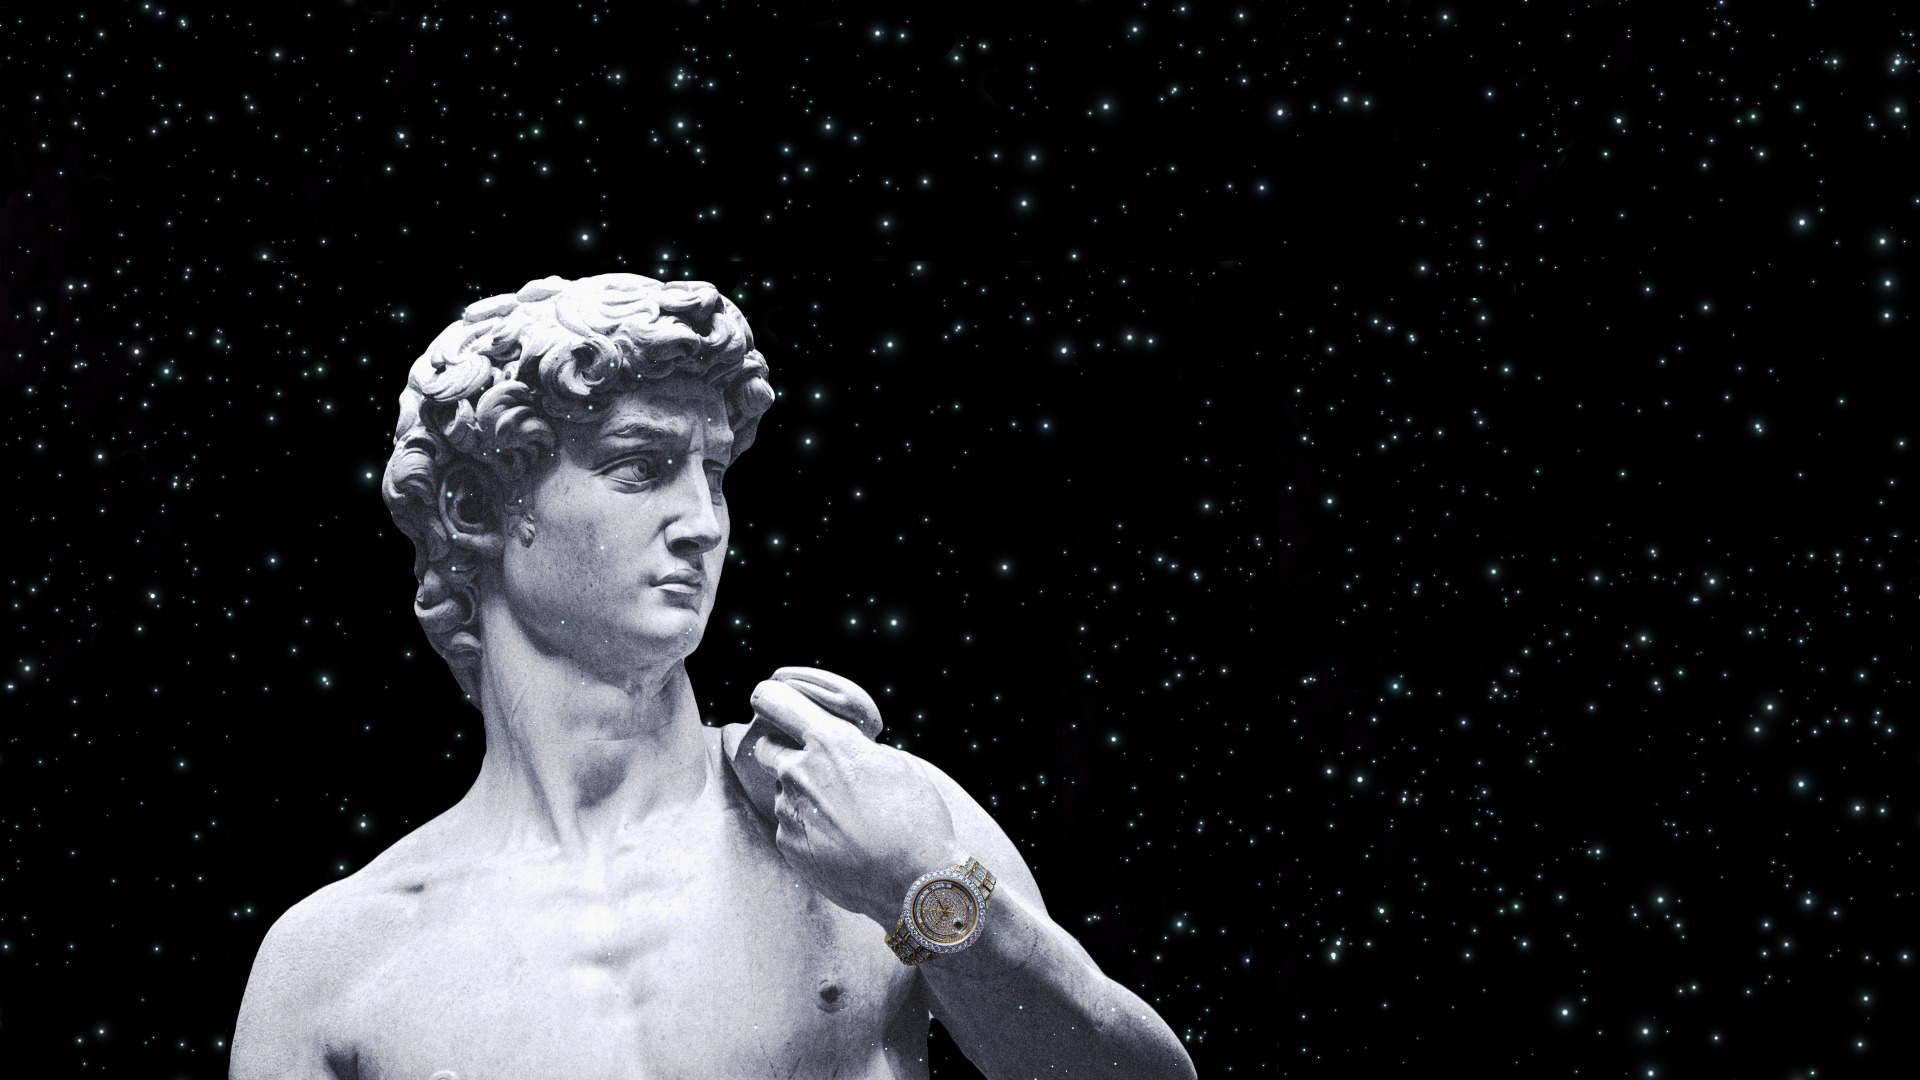 Statue of David, Marble, Rolex, Gold Watch, Space, Stars Wallpaper